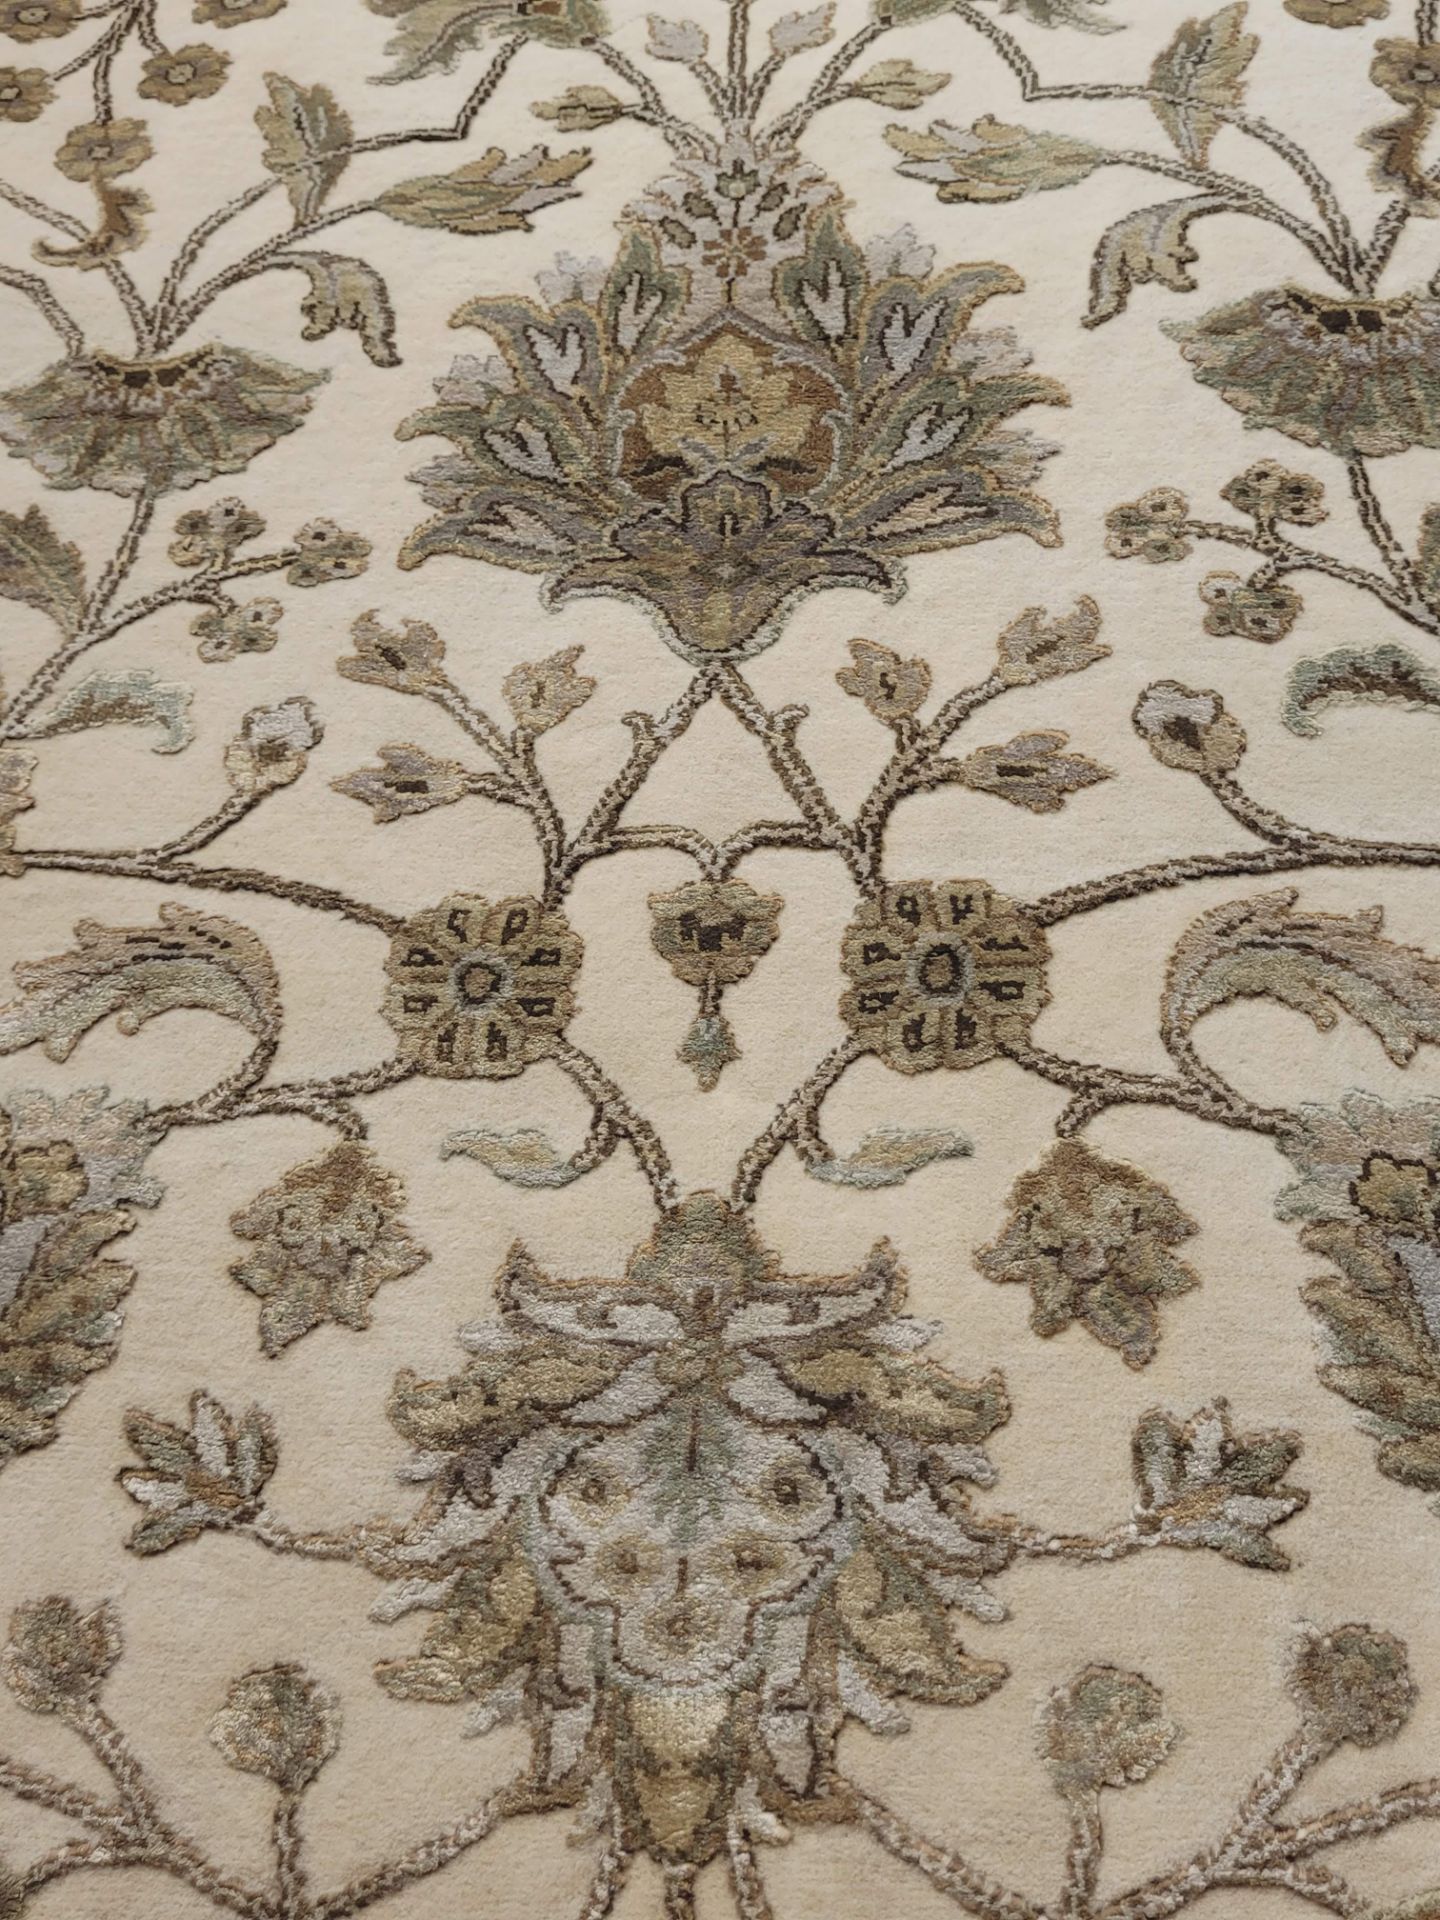 8'3" X 10' PWI/PWI - WOOL/ART. SILK HAND KNOTTED IN INDIA - MSRP $12,475.00 (LOCATED IN GALLERY - Image 3 of 5